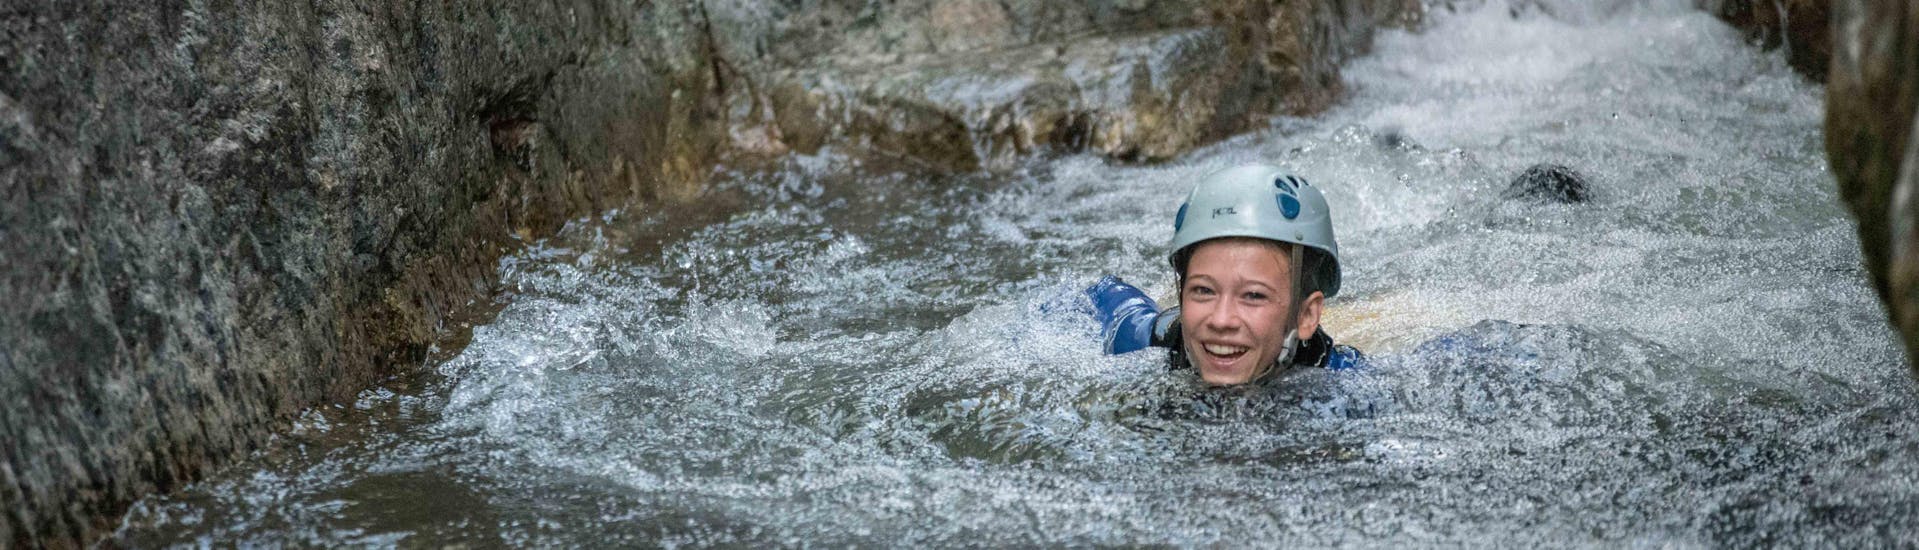 Canyoning Classico nel canyon dell'Aéro Besorgues nell'Ardèche.